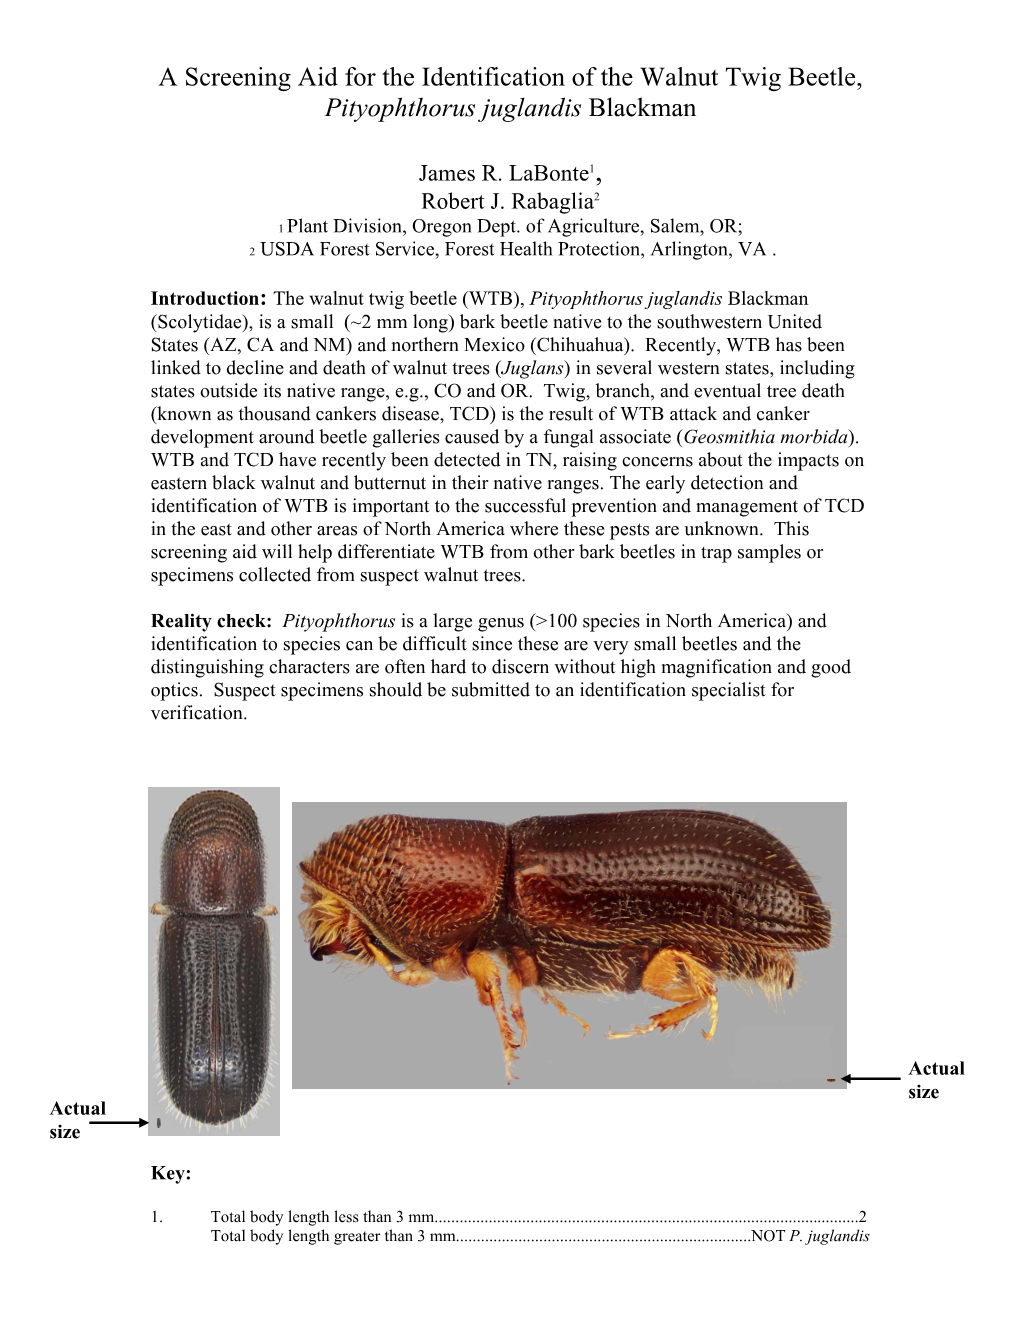 A Screening Aid for the Identification of the Walnut Twig Beetle, Pityophthorus Juglandis Blackman